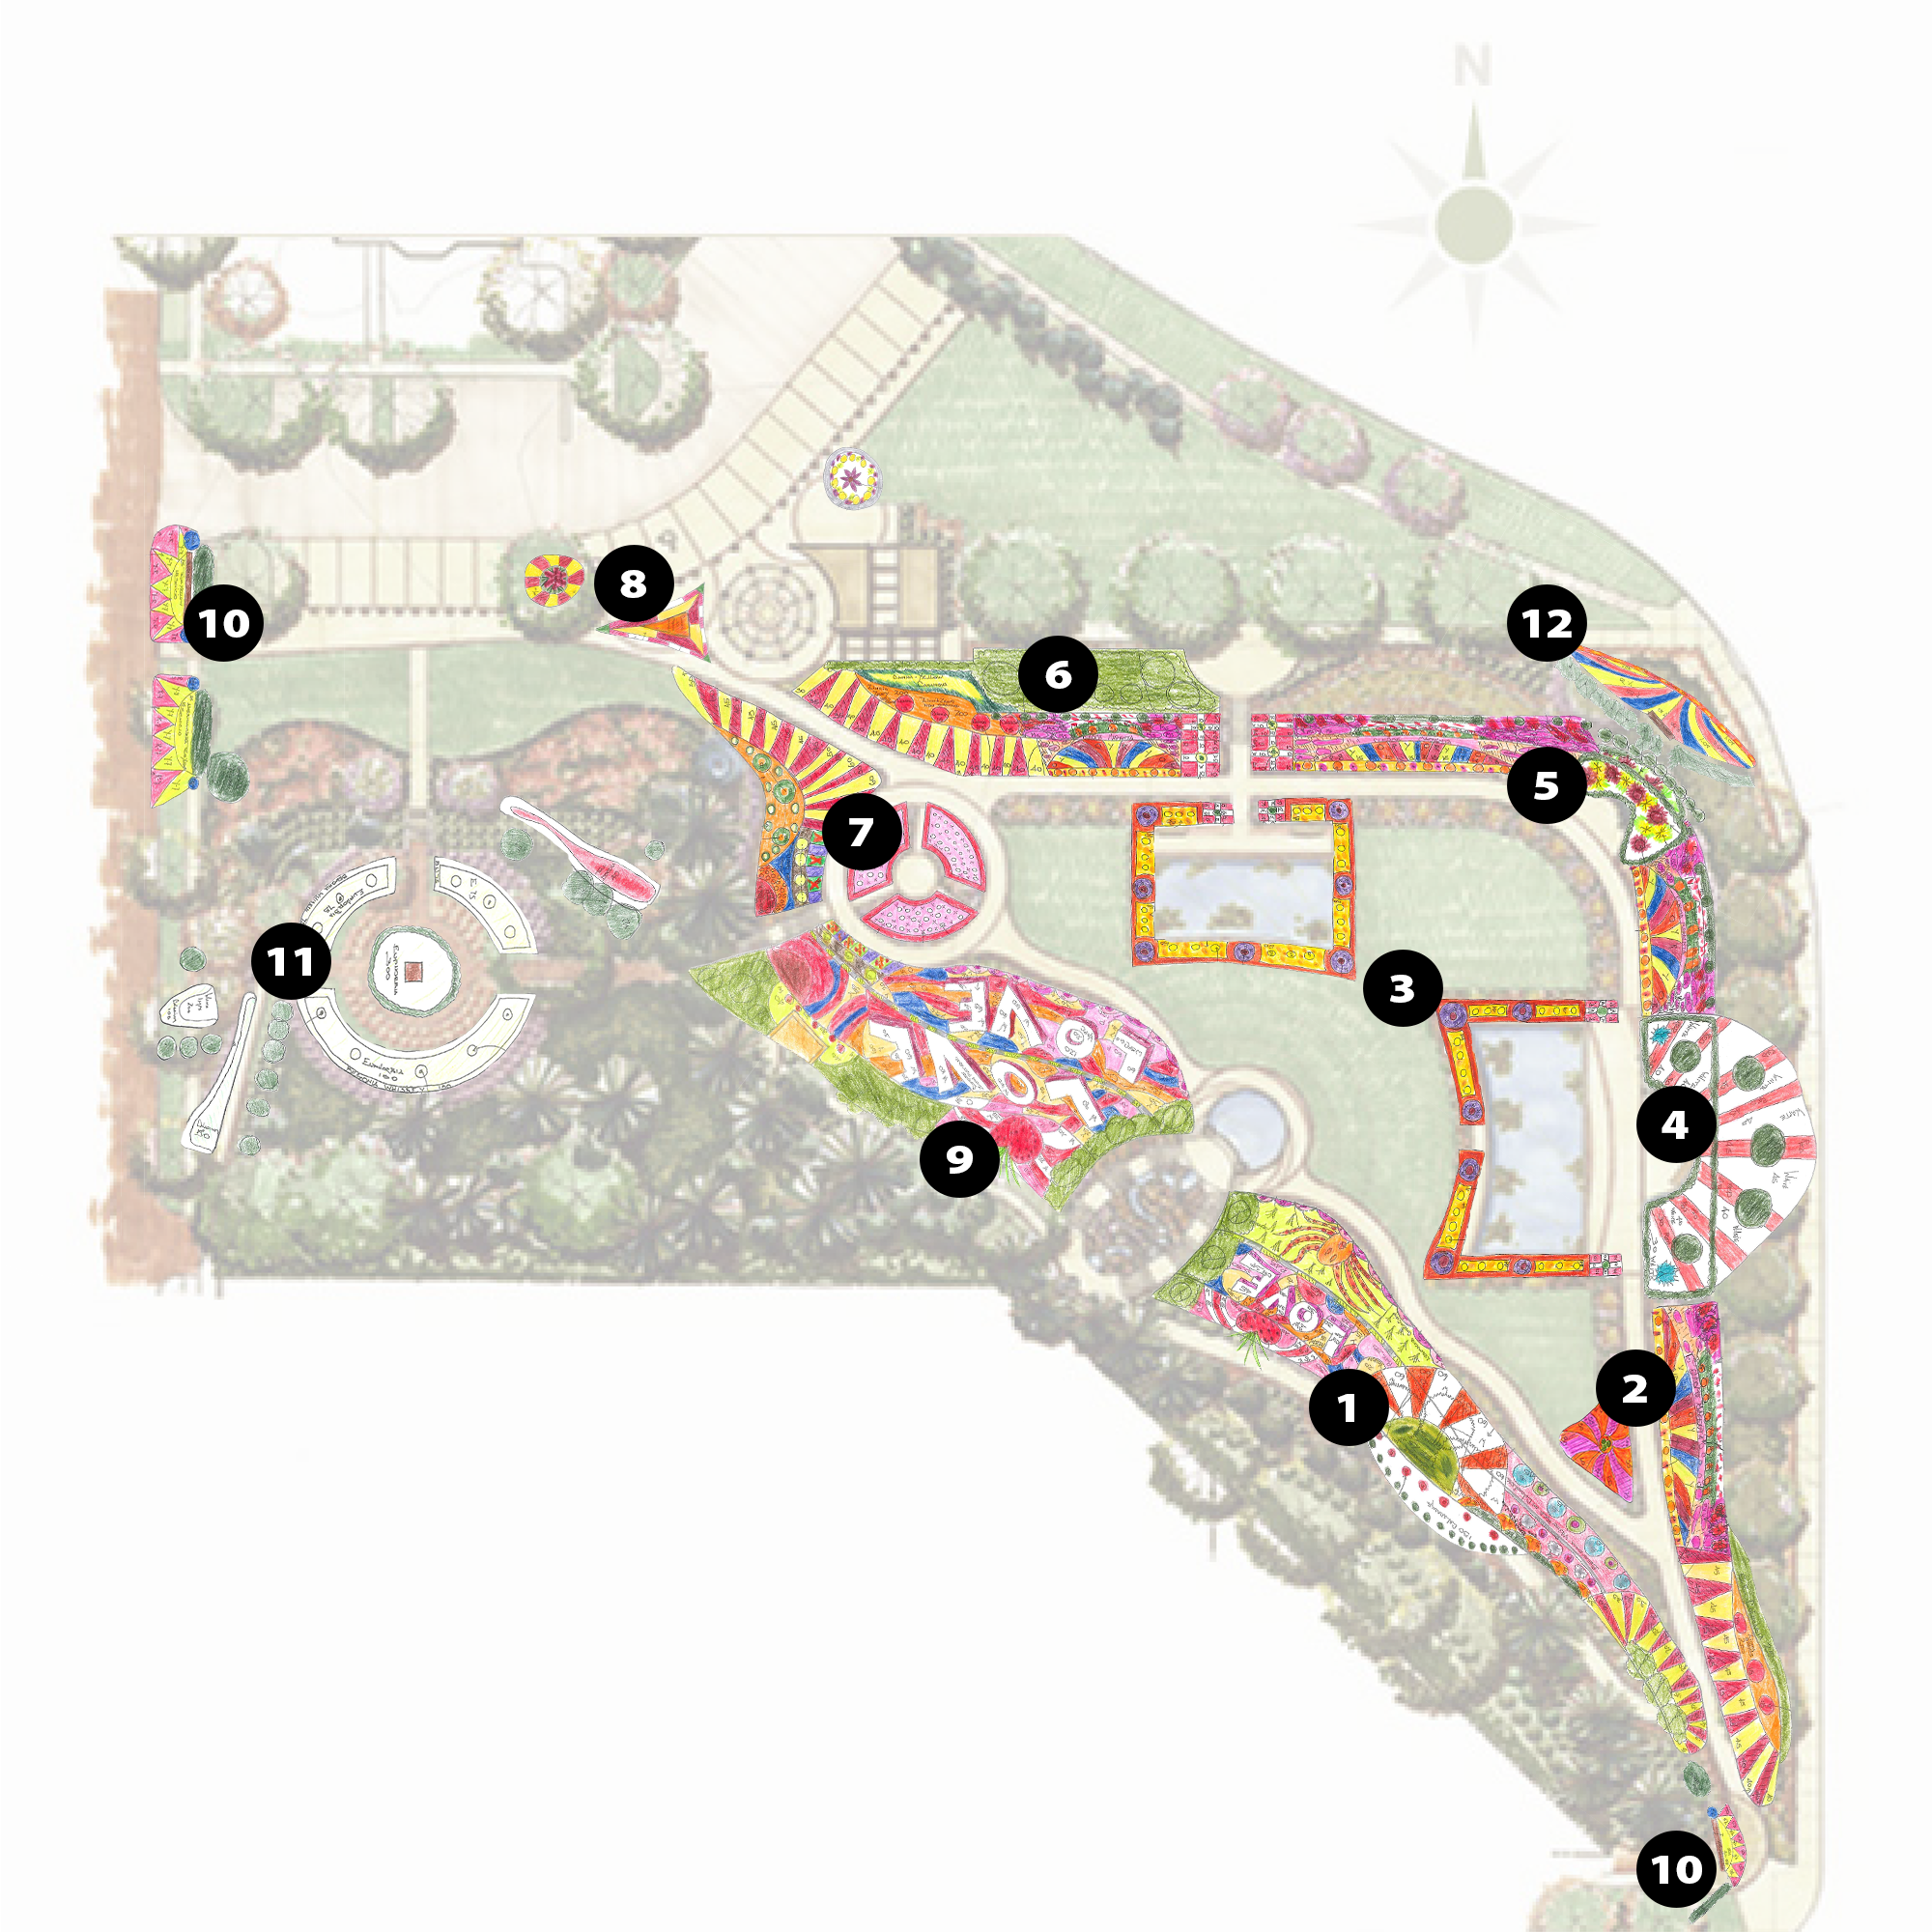 A map of Sunken Garden's floral plan for 2023. There are sections of designs with designated numbers. 